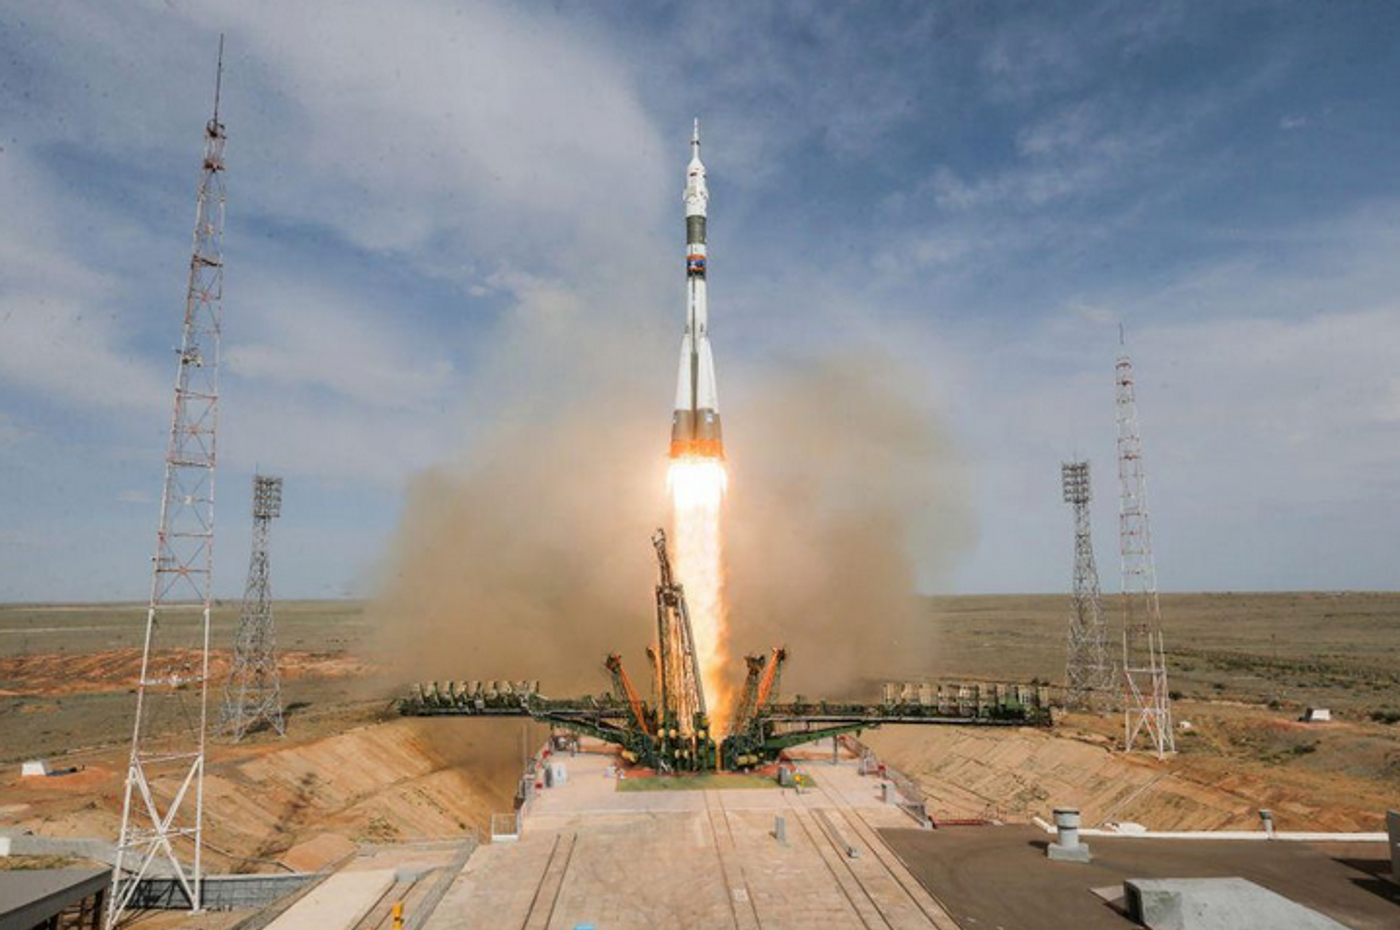 An image of the Soyuz rocket taking off just before it failed.